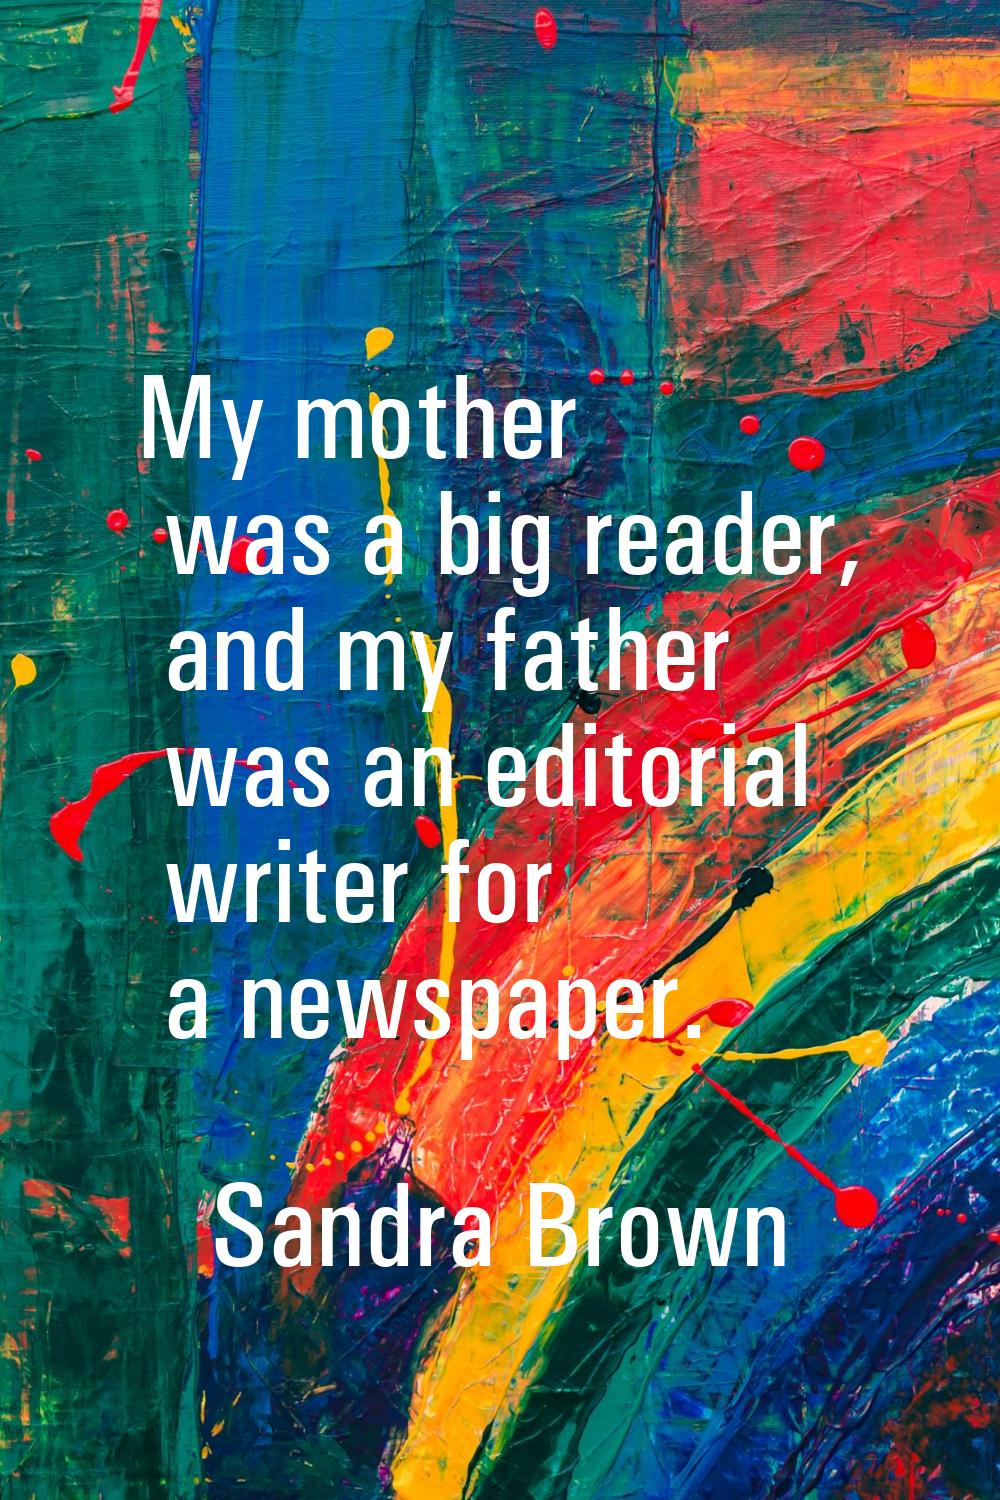 My mother was a big reader, and my father was an editorial writer for a newspaper.